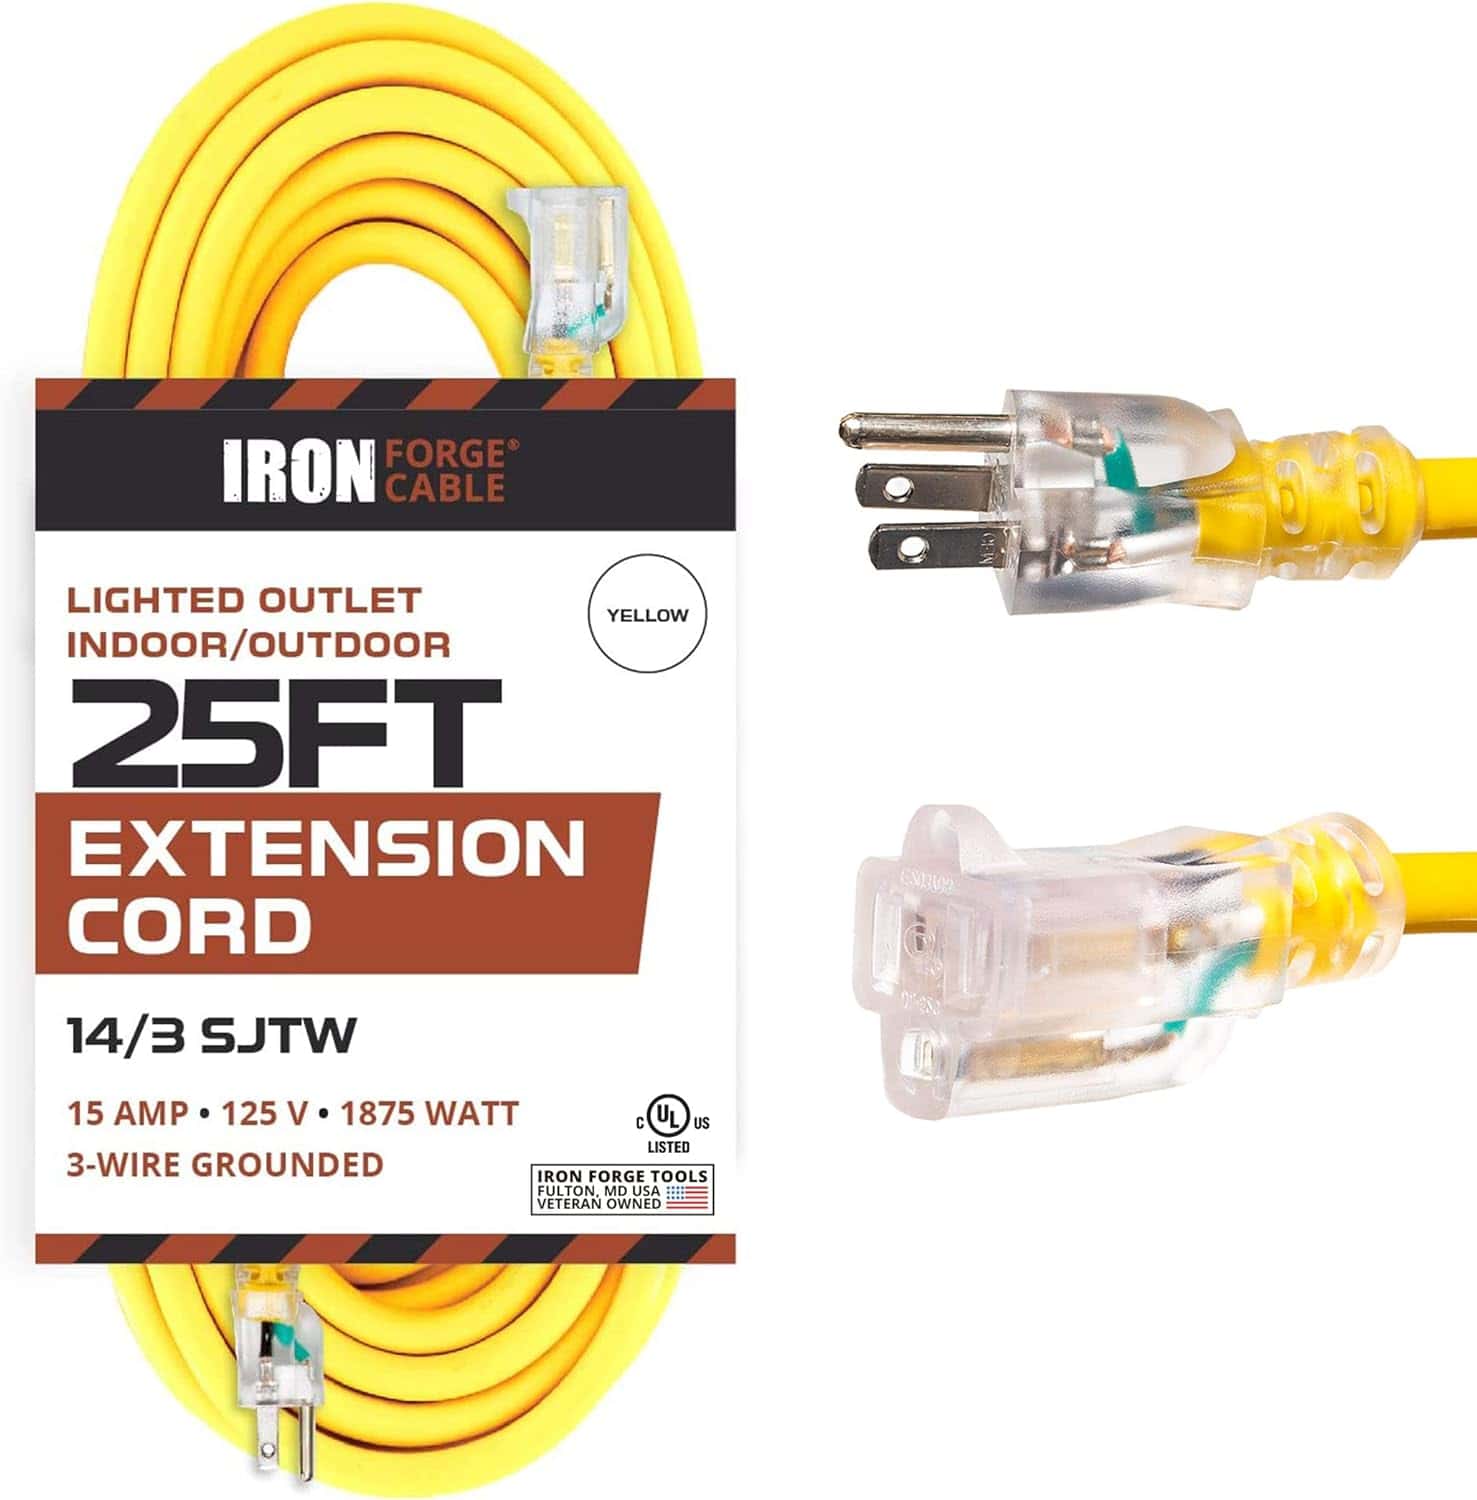 25-Foot-Lighted-Outdoor-Extension-Cord-14-3-SJTW-Heavy-Duty-Yellow-Extension-Cable-with-3-Prong-Grounded-Plug-for-Safety-Great-for-Garden-and-Major-Appliance